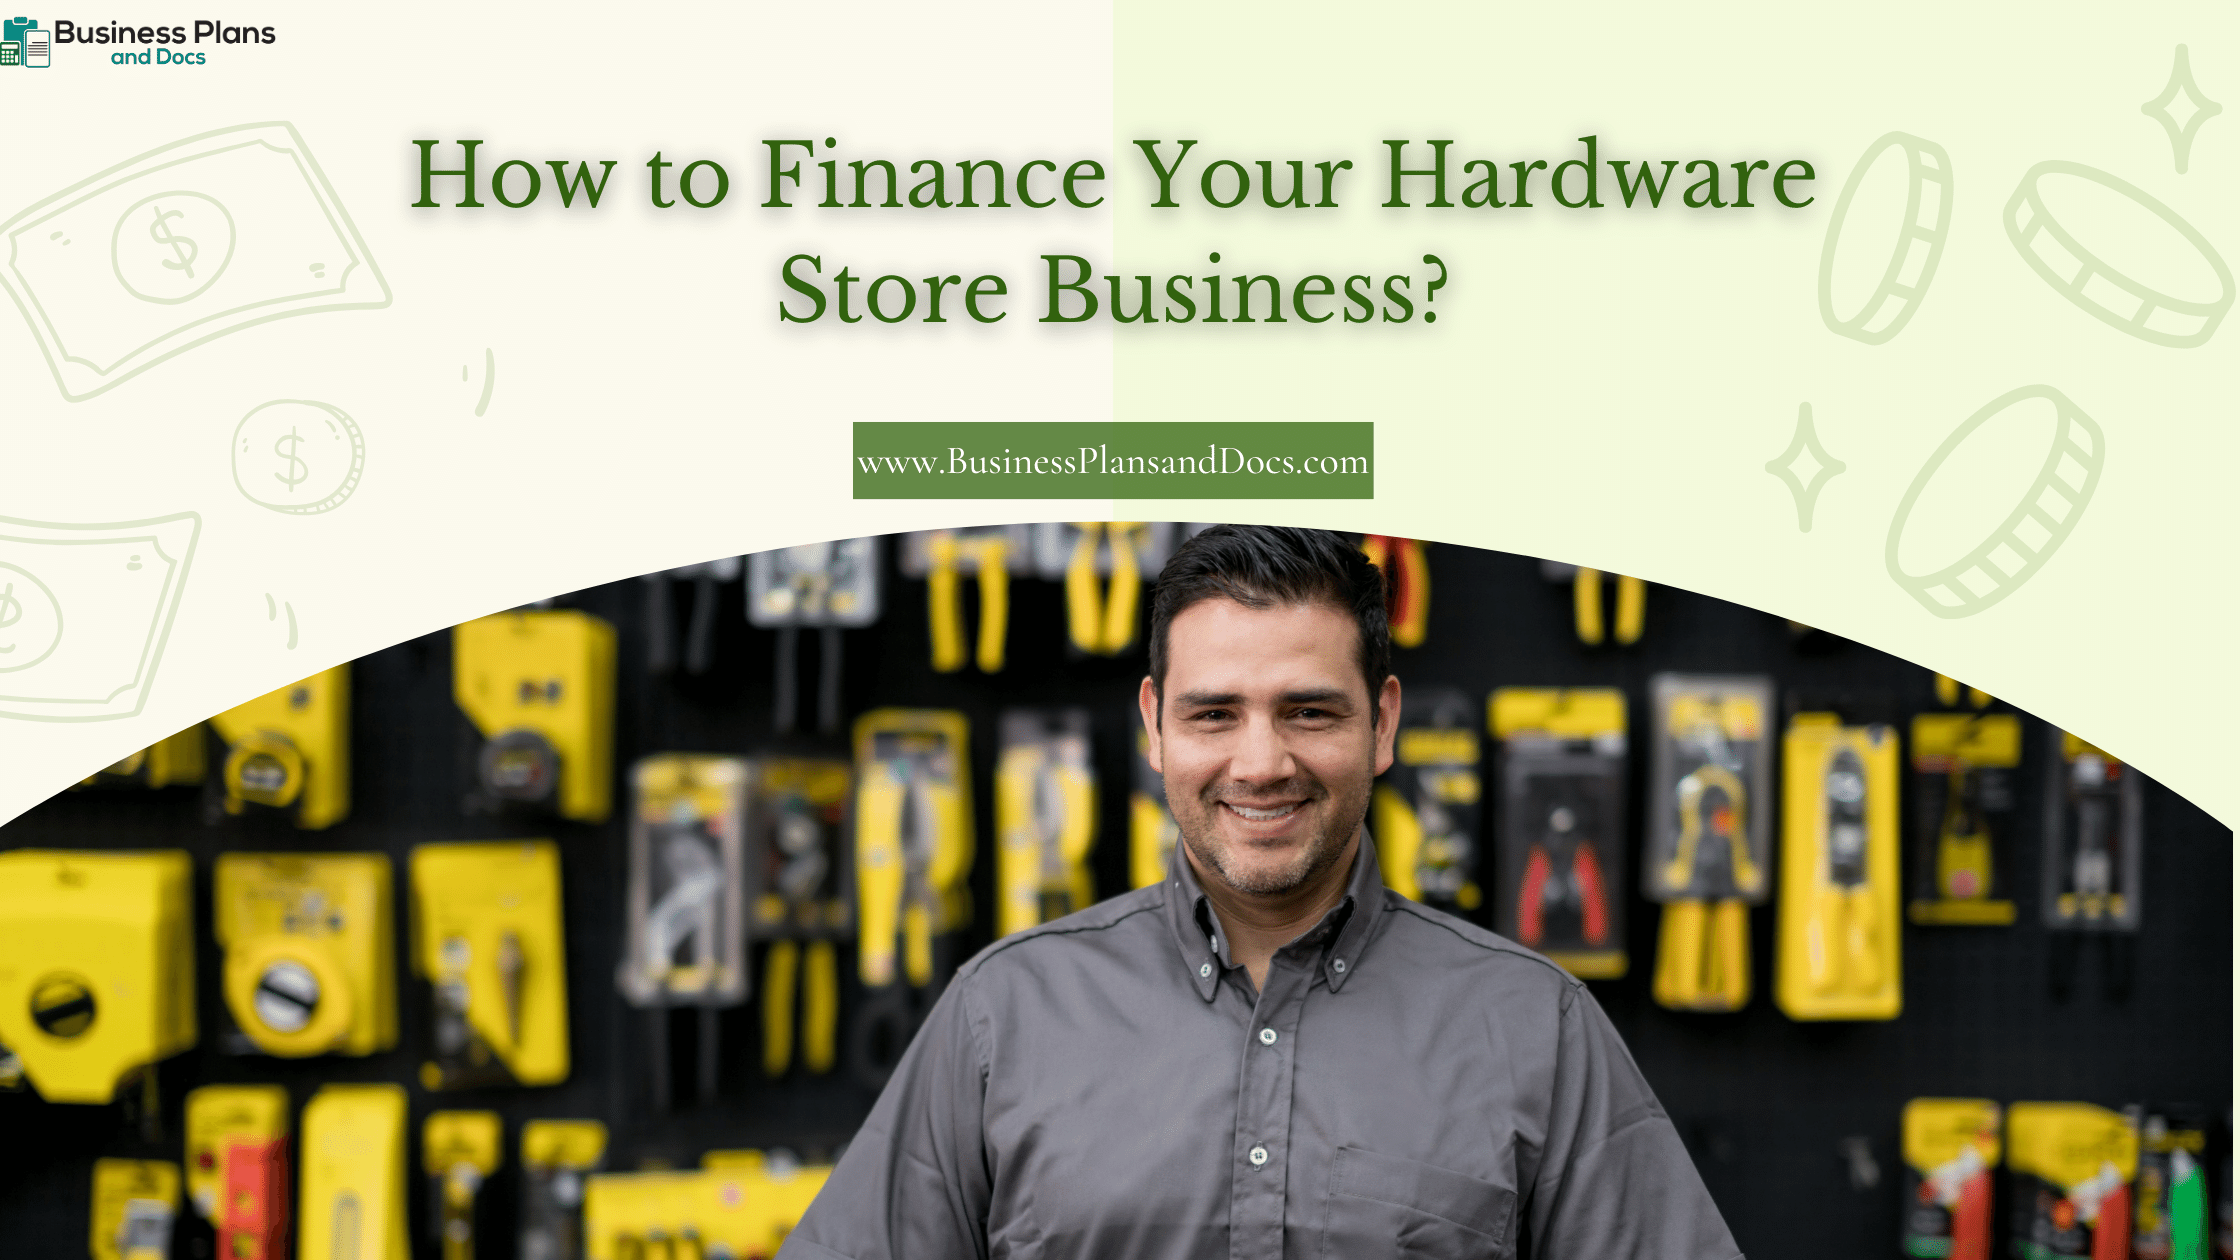 How to Finance Your Hardware Store Business?